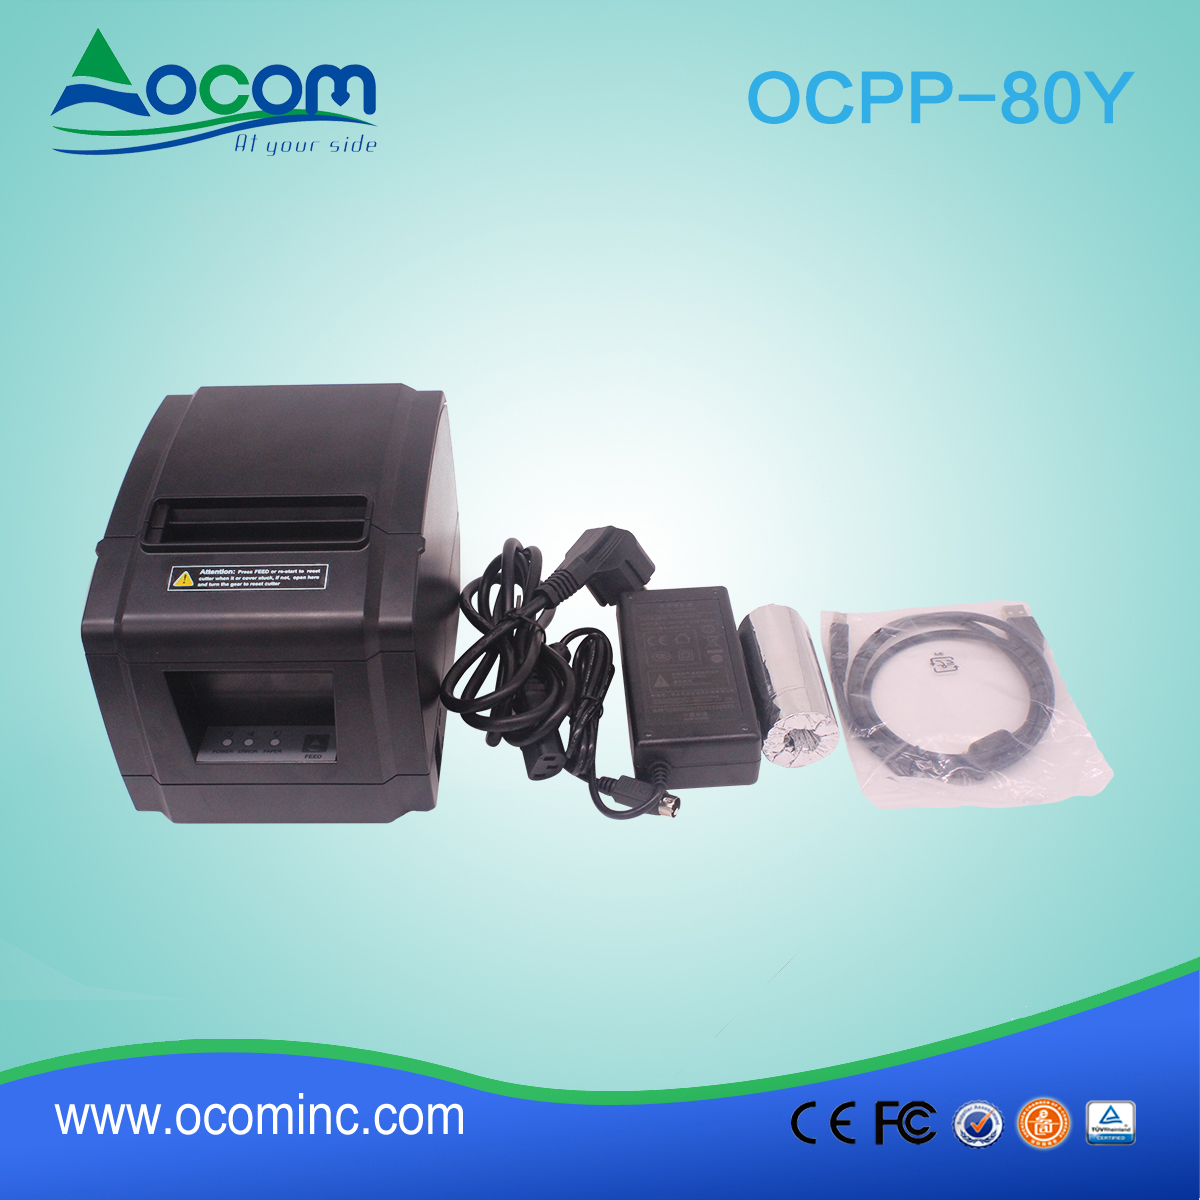 OCPP-80Y-China 80mm POS receipt printer is in promoting